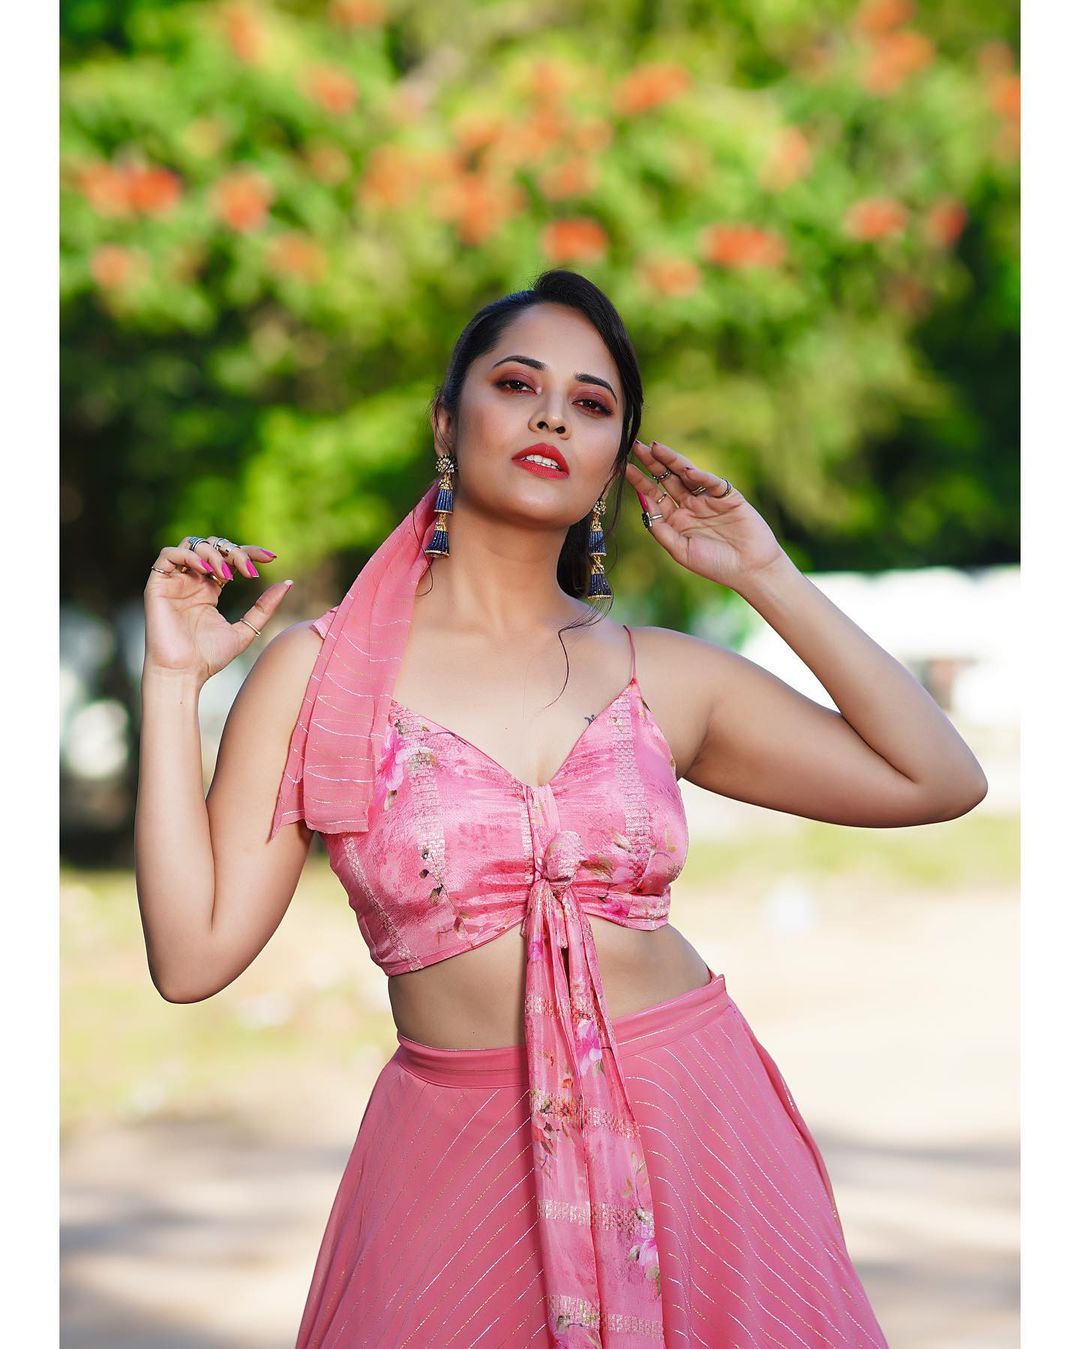 Pic Talk : Anasuya Teases Fans With Her Hot Looks!